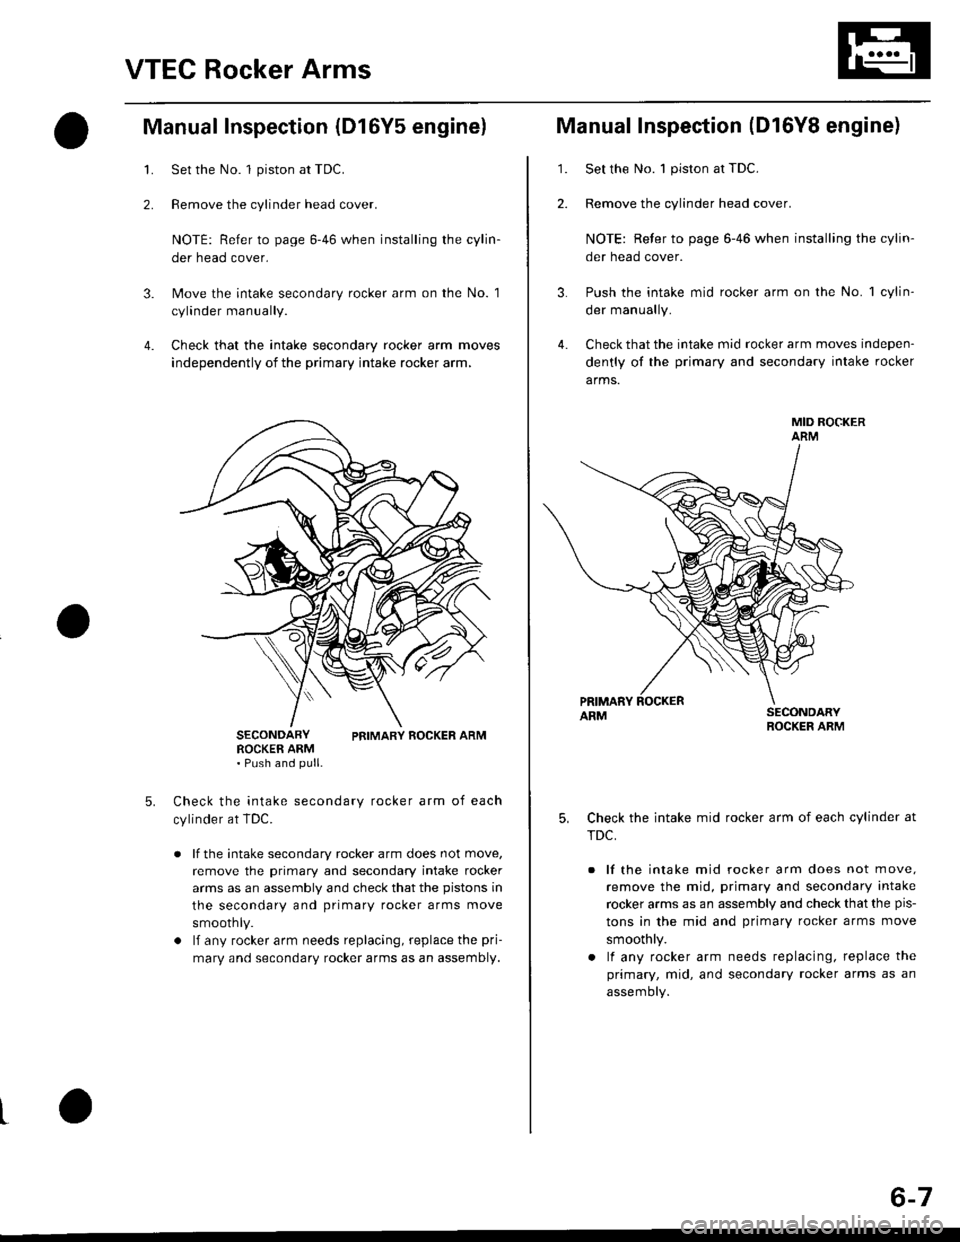 HONDA CIVIC 1998 6.G Workshop Manual VTEC Rocker Arms
2.
Manual Inspection (D16Y5 engine)
3.
1.
4.
Set the No. 1 piston at TDC.
Remove the cylinder head cover.
NOTE: Refer to page 6-46 when installing the cylin-
der head cover.
Move the 